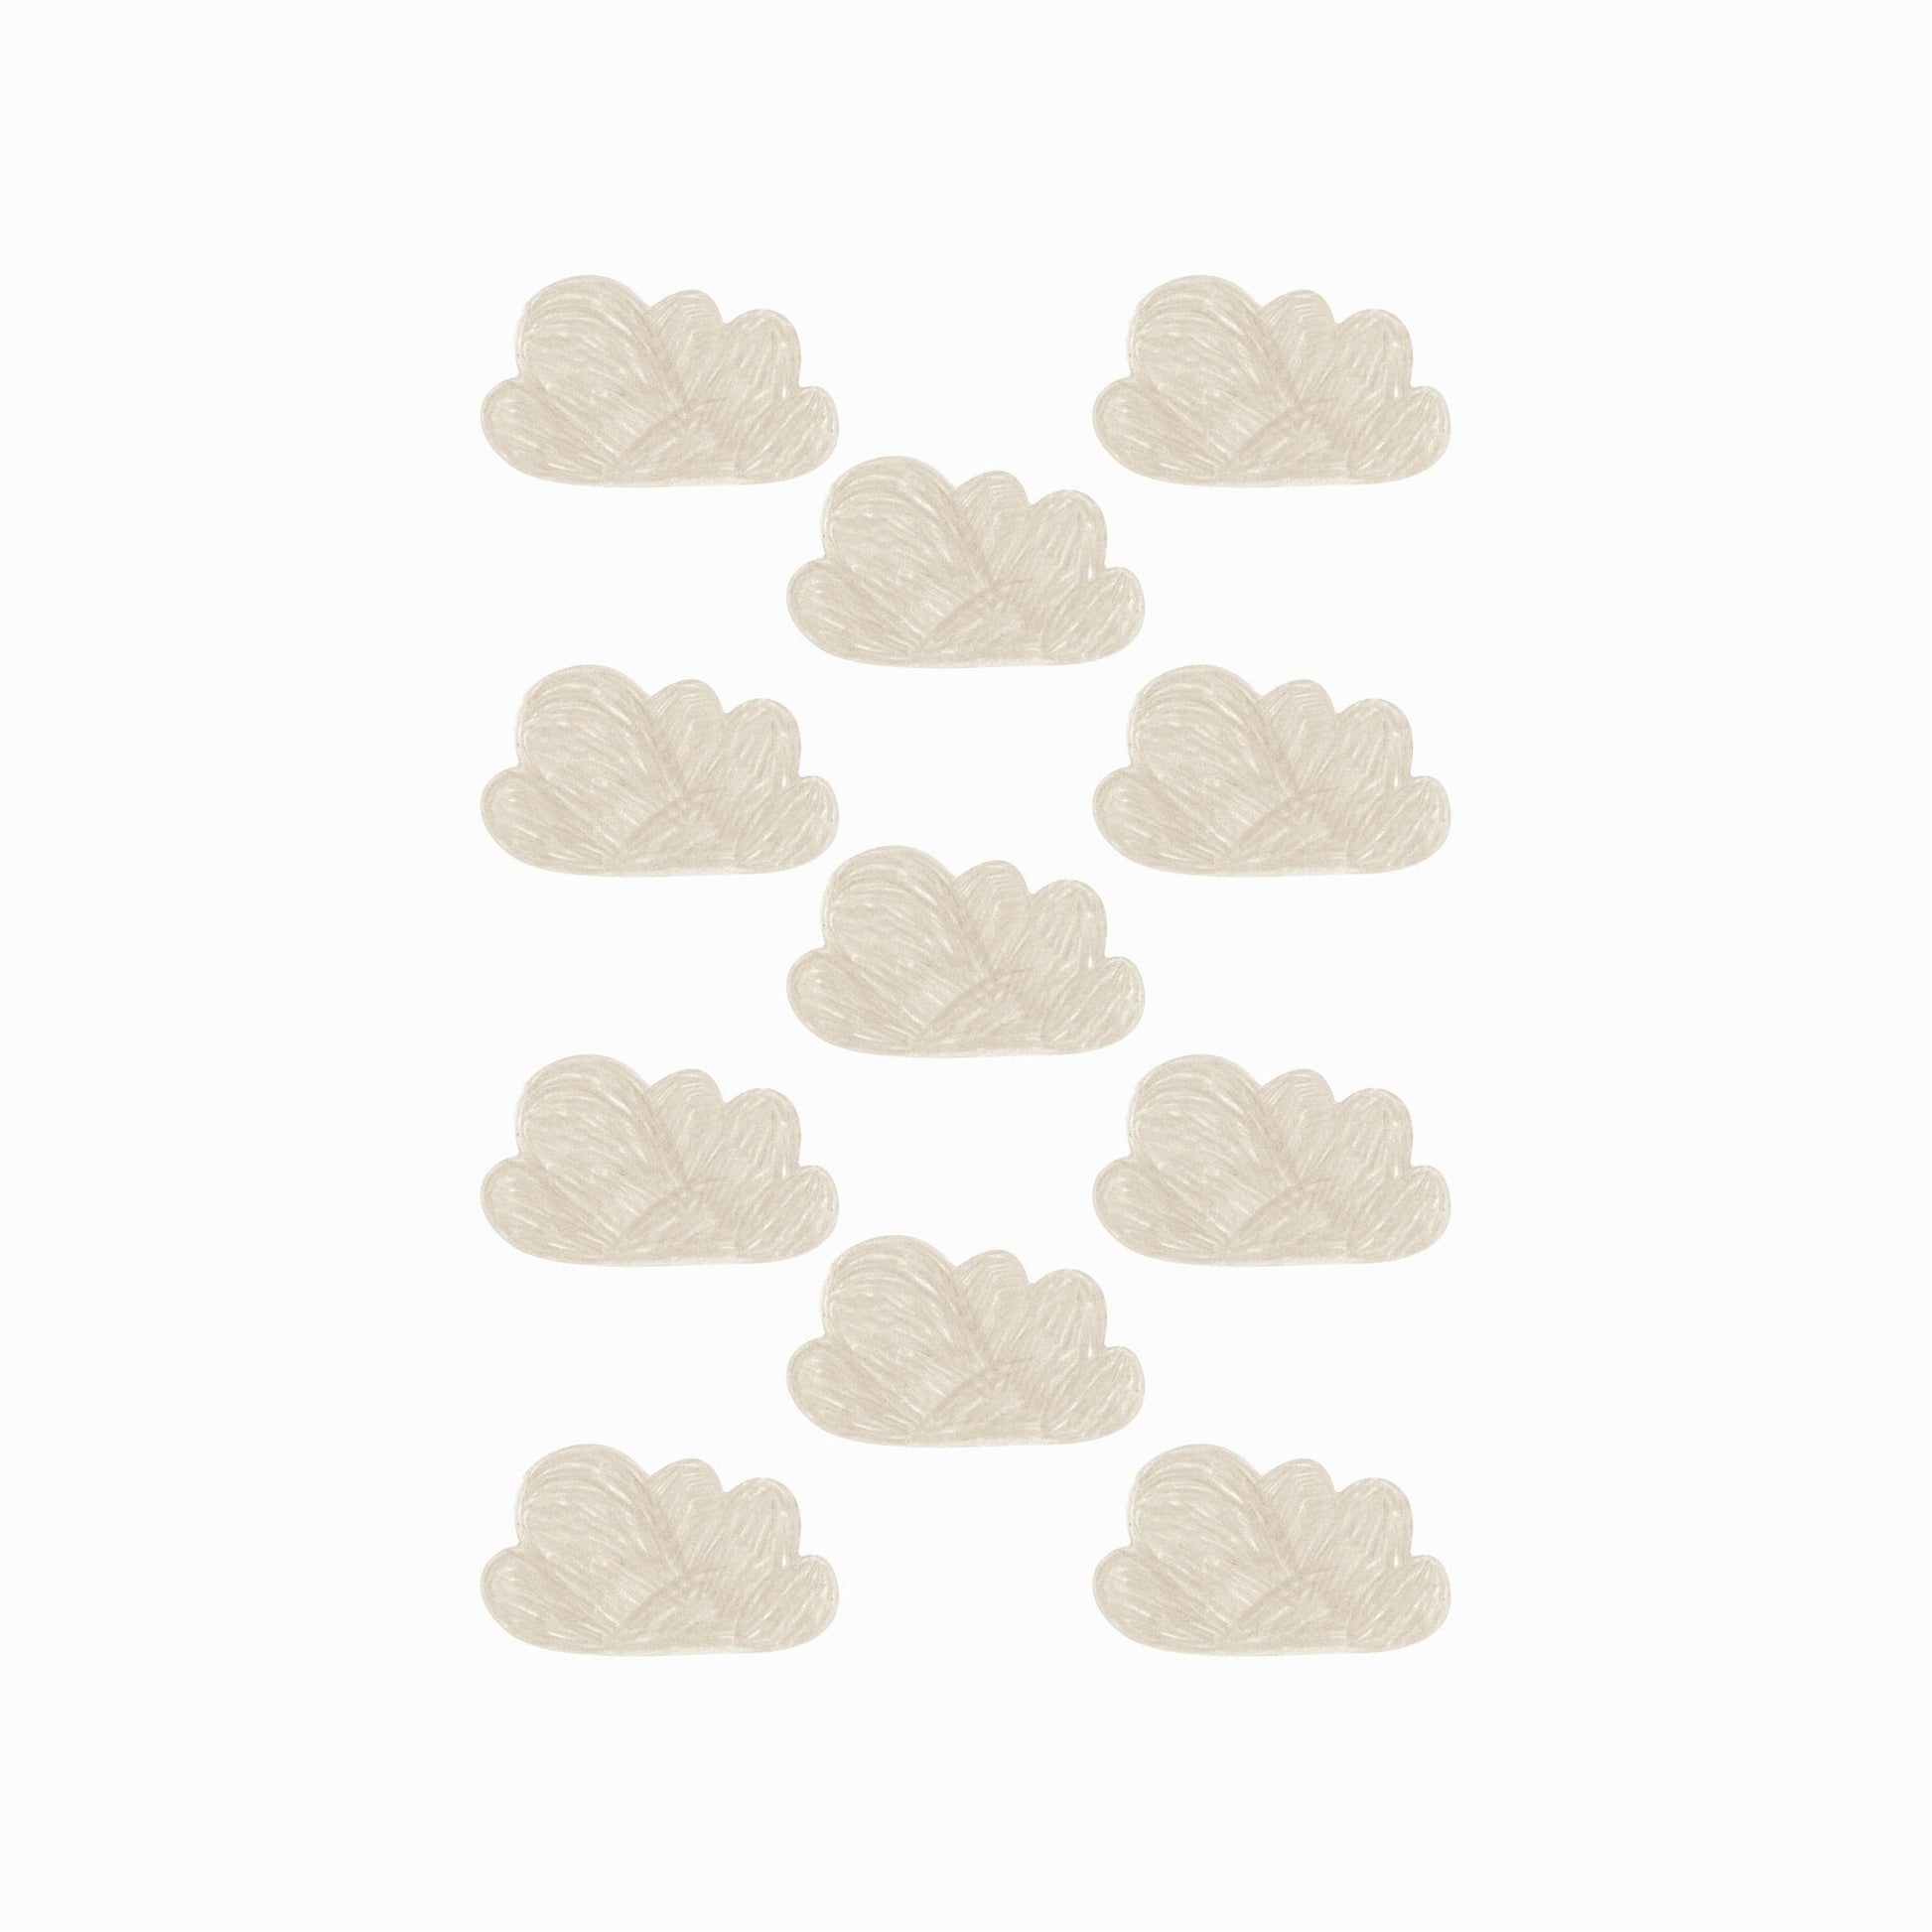 Image showng a sheet of the hand-painted mini cloud wall stickers in brown